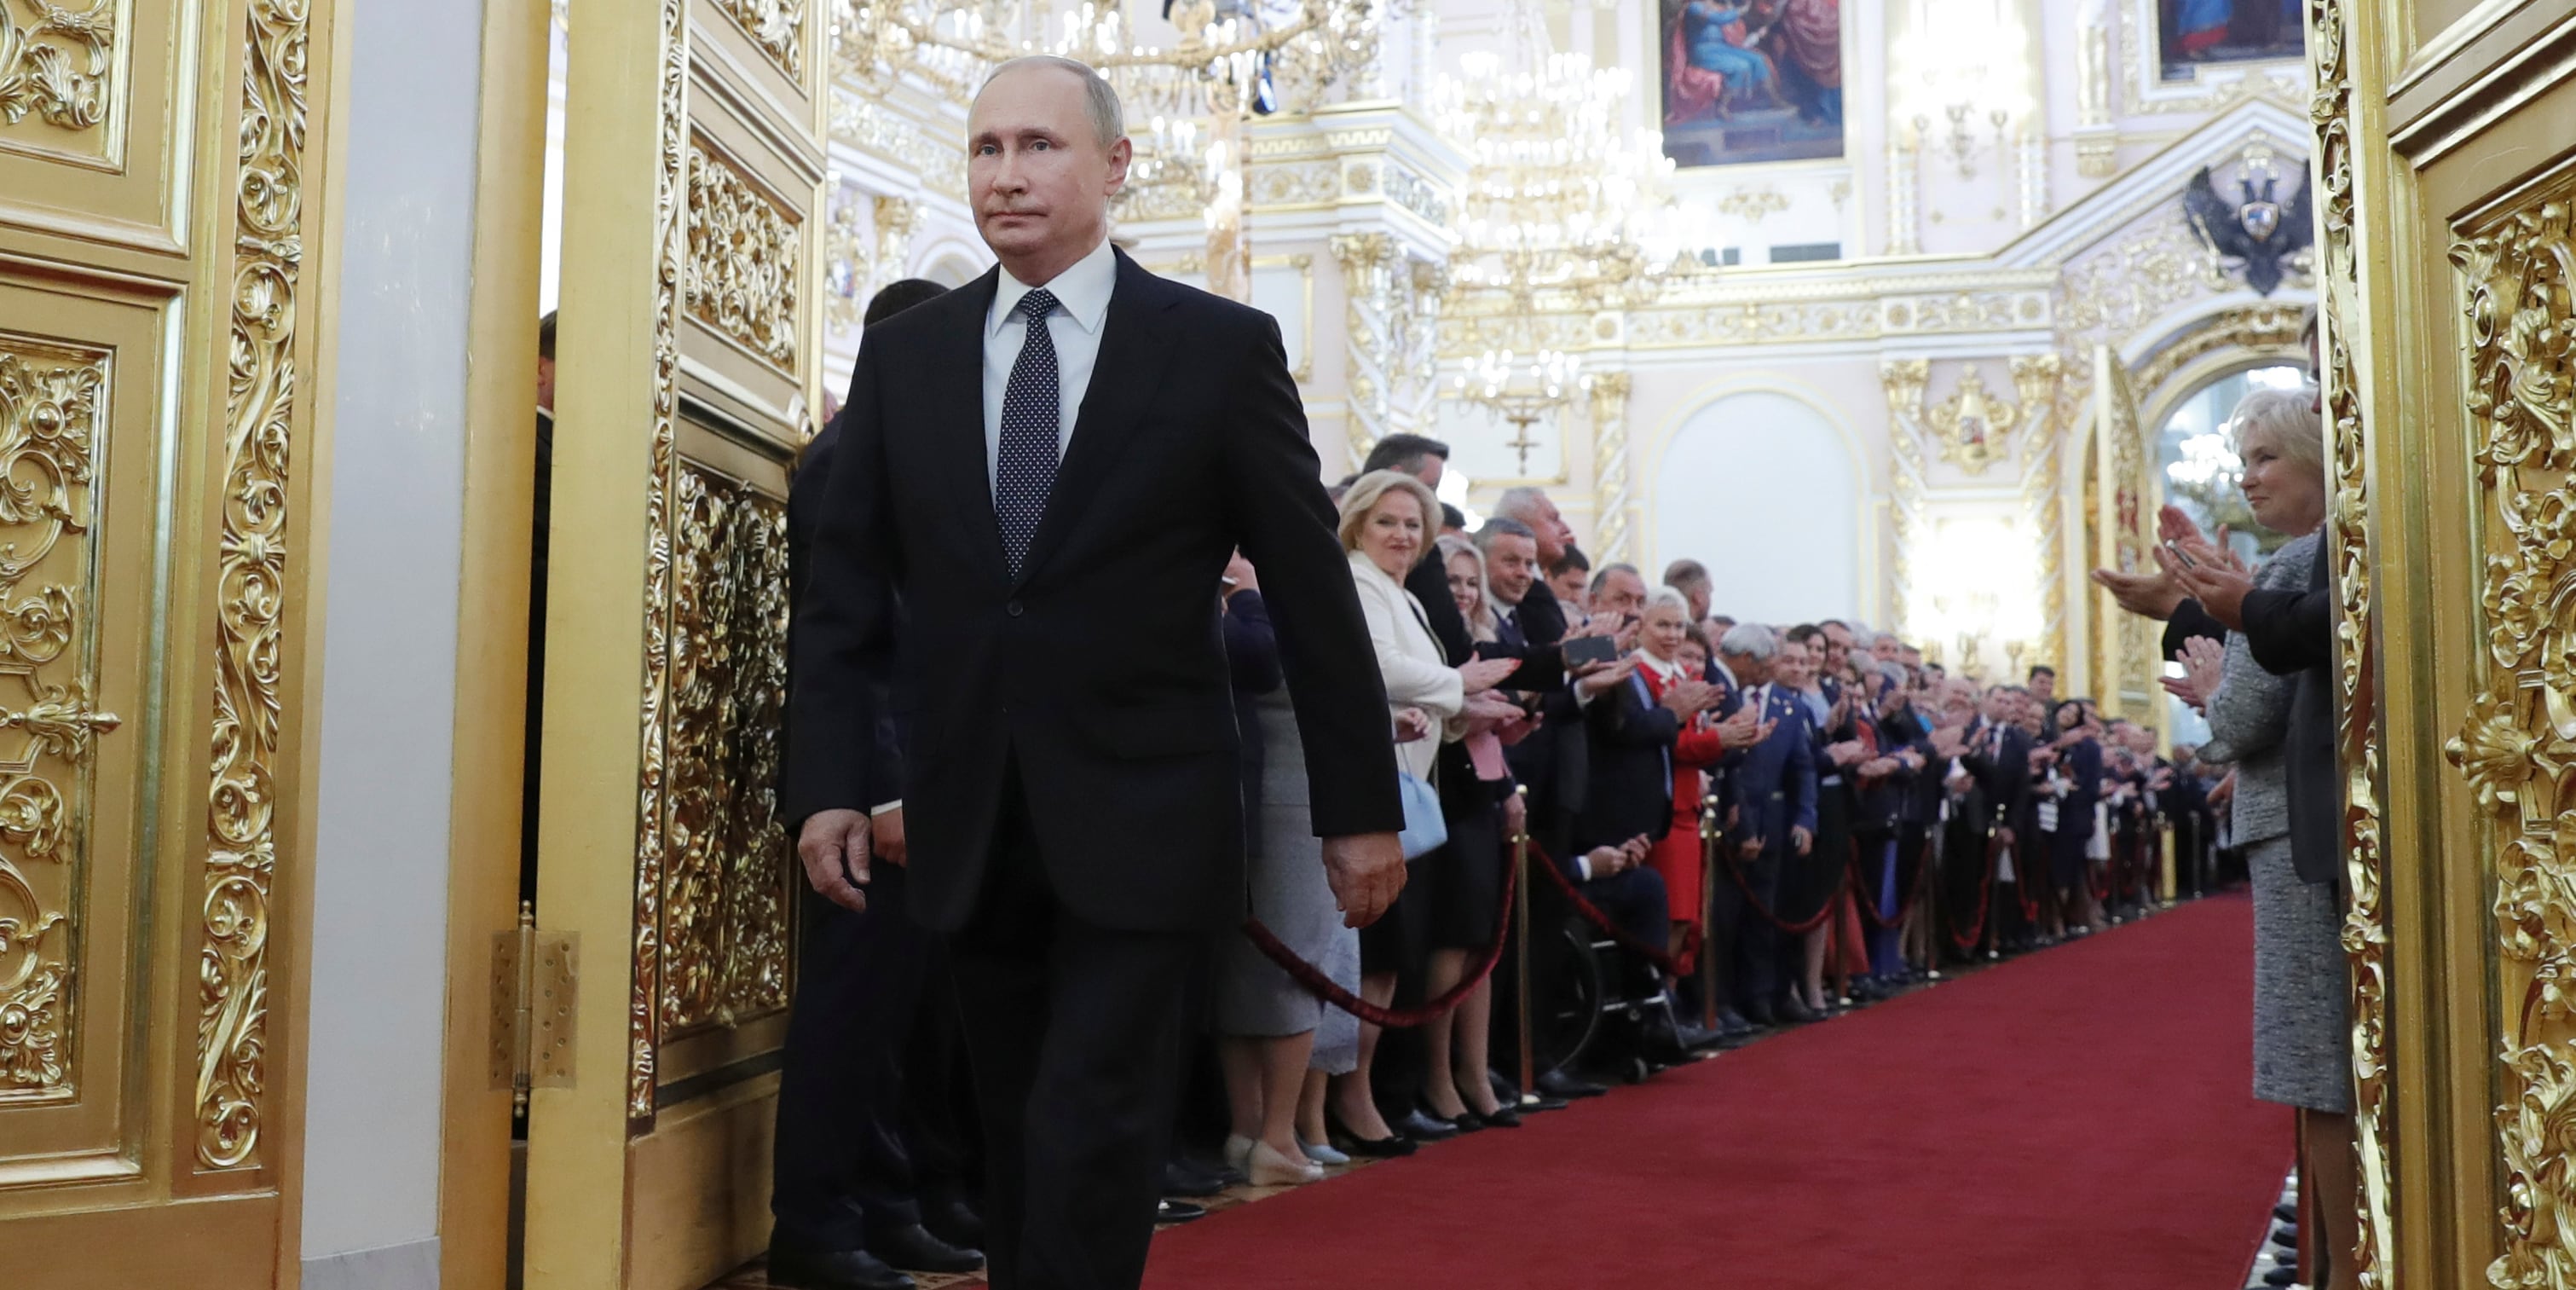 putin's new term - why some eu nations are not attending